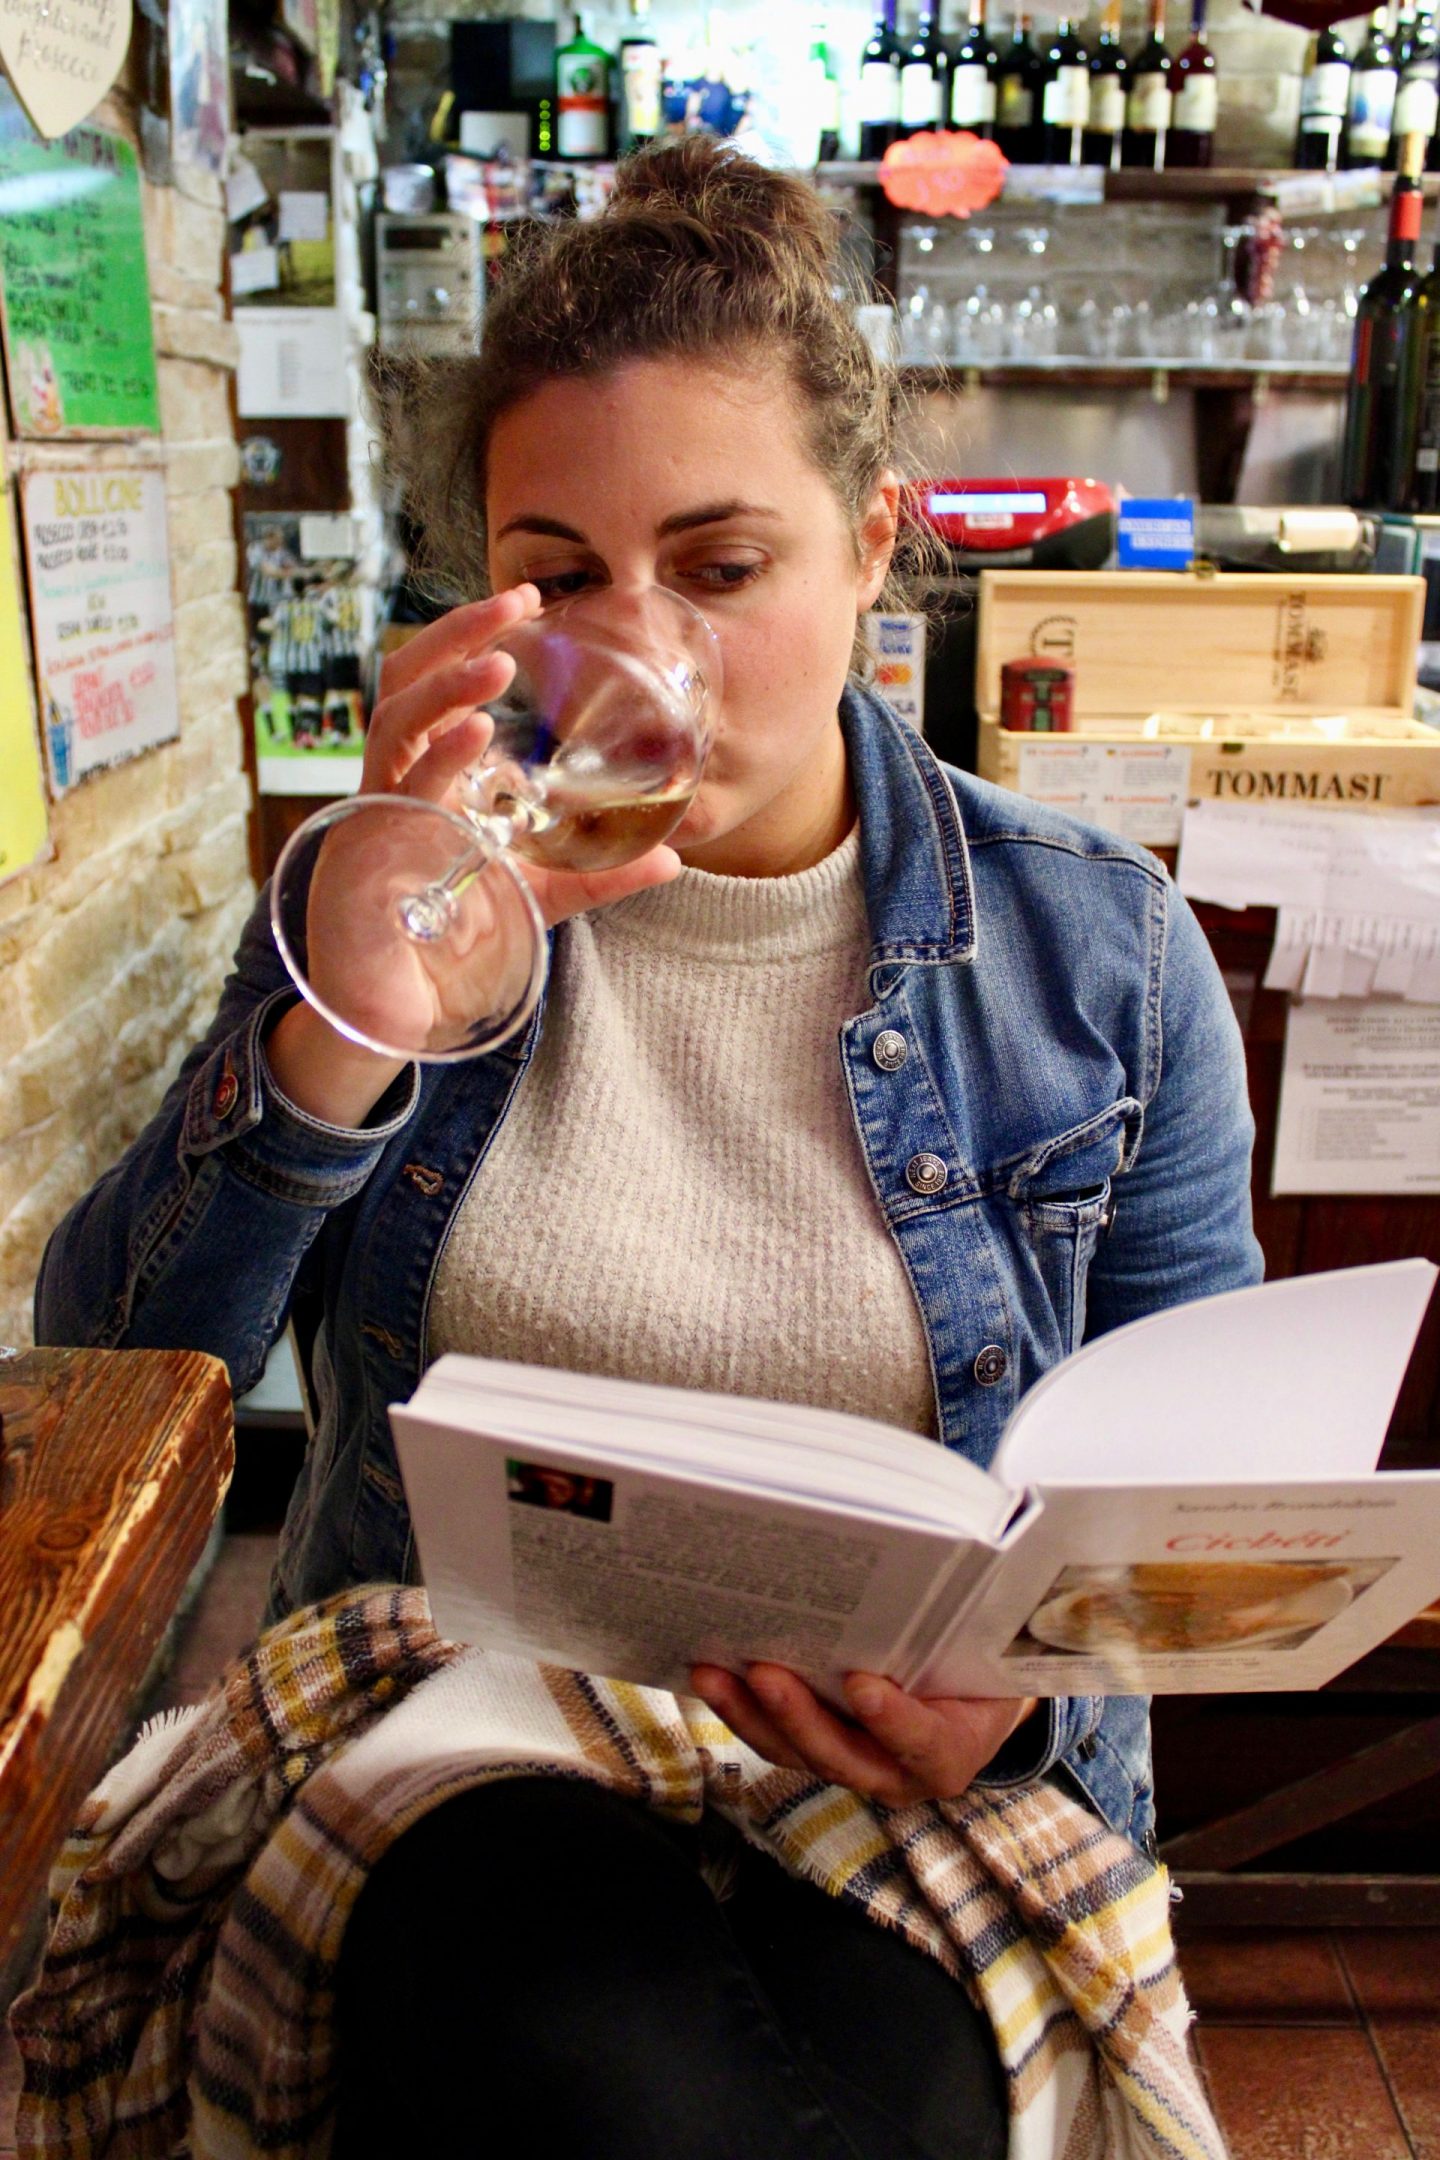 best cicchetti in Venice: Nell drinking a glass of white wine and reading a book about cicchetti